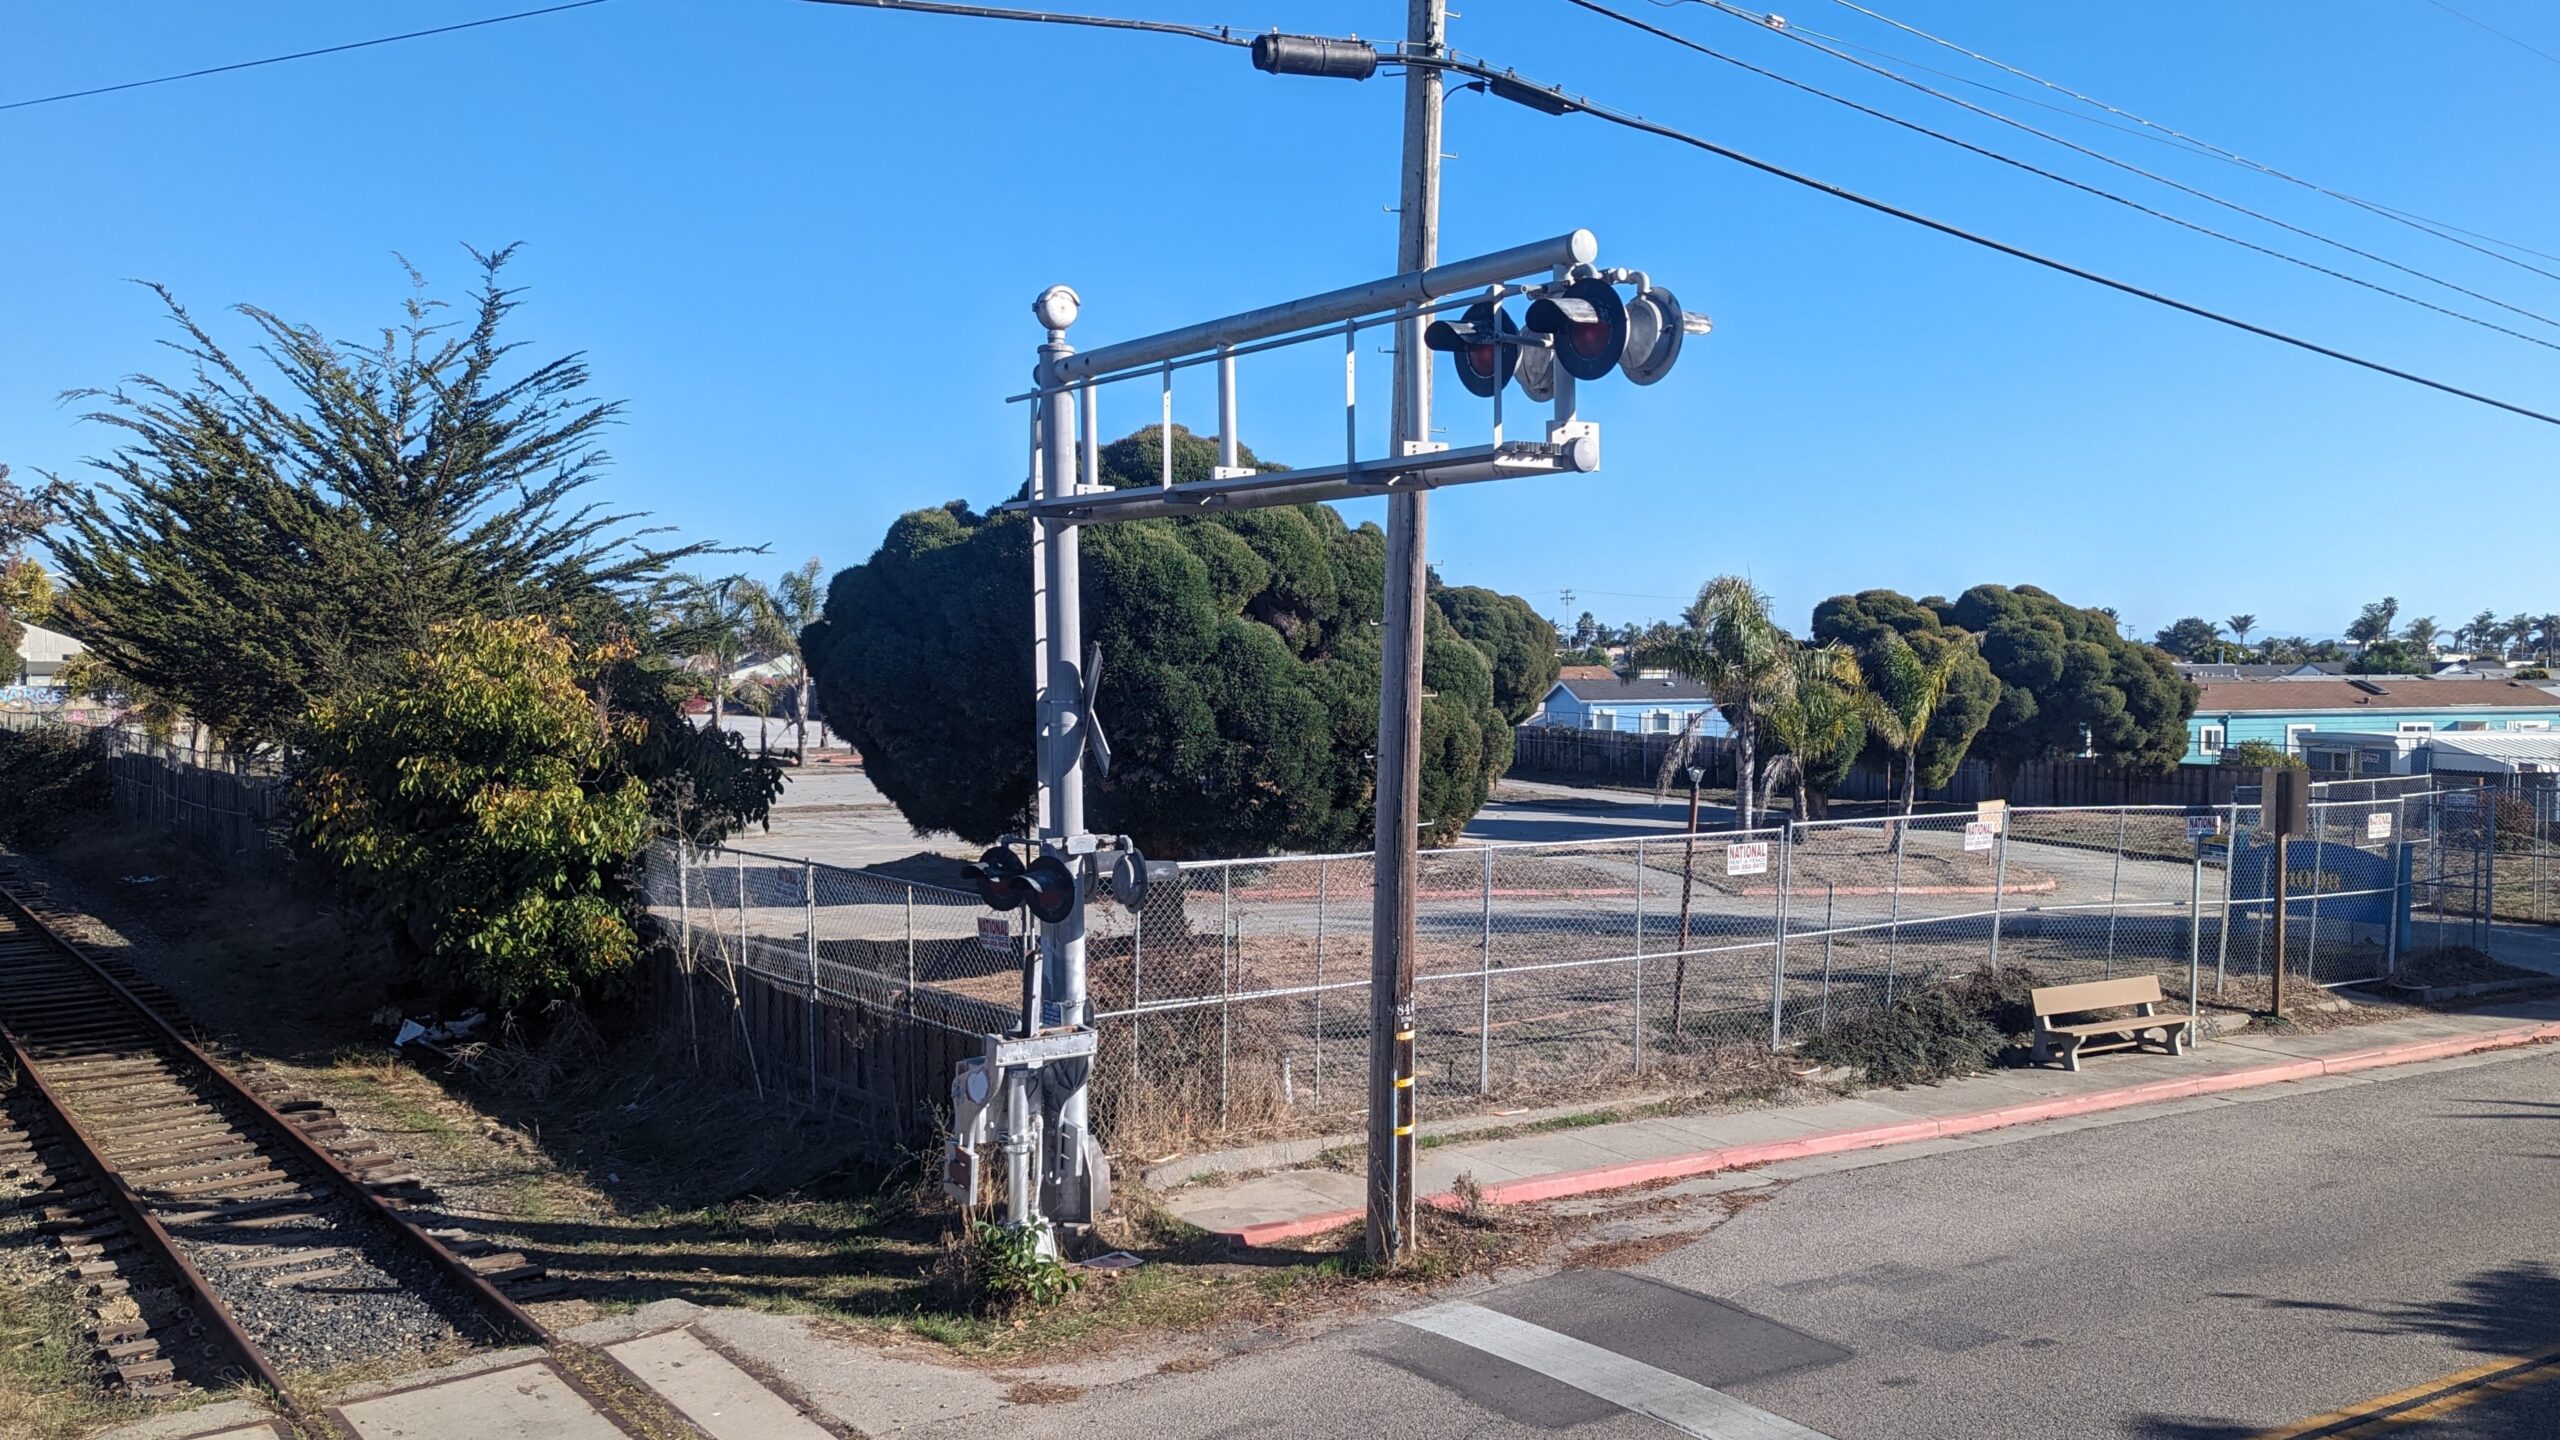 MidPen Housing's proposed affordable housing project is next to the Santa Cruz Branch Rail Line.